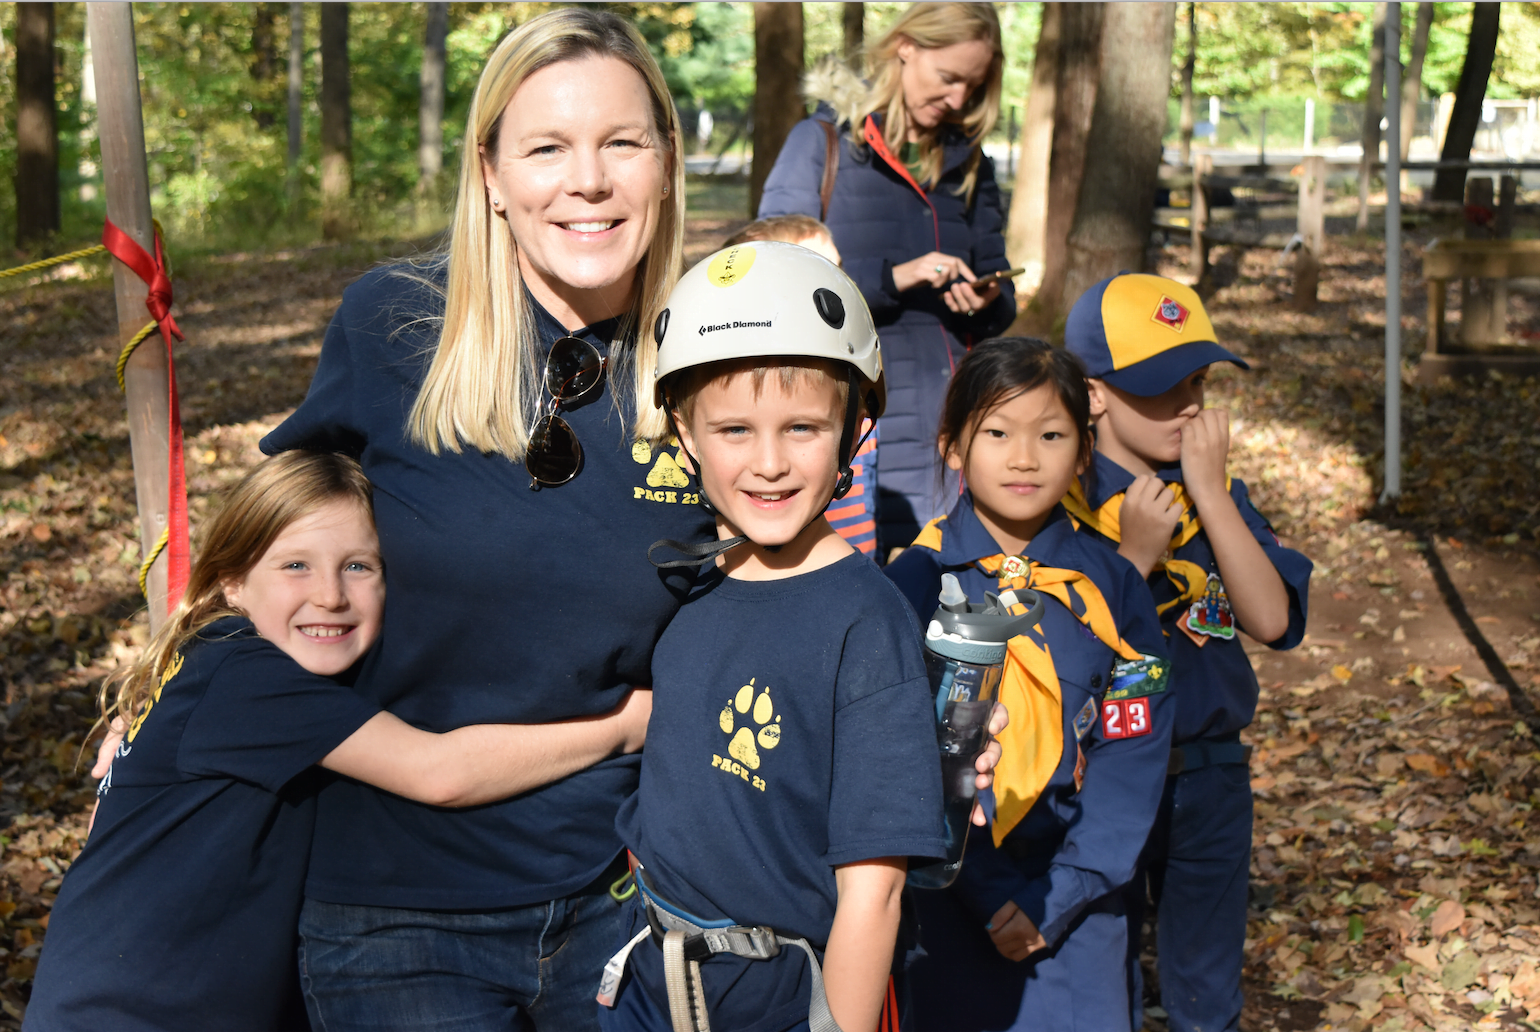 Pack 23 Cubmaster Cindy DiPreta with Cub Scouts Charlotte and Chris DiPreta at Greenwich Scouting's Fall Festival at Seton Scout Reservation.